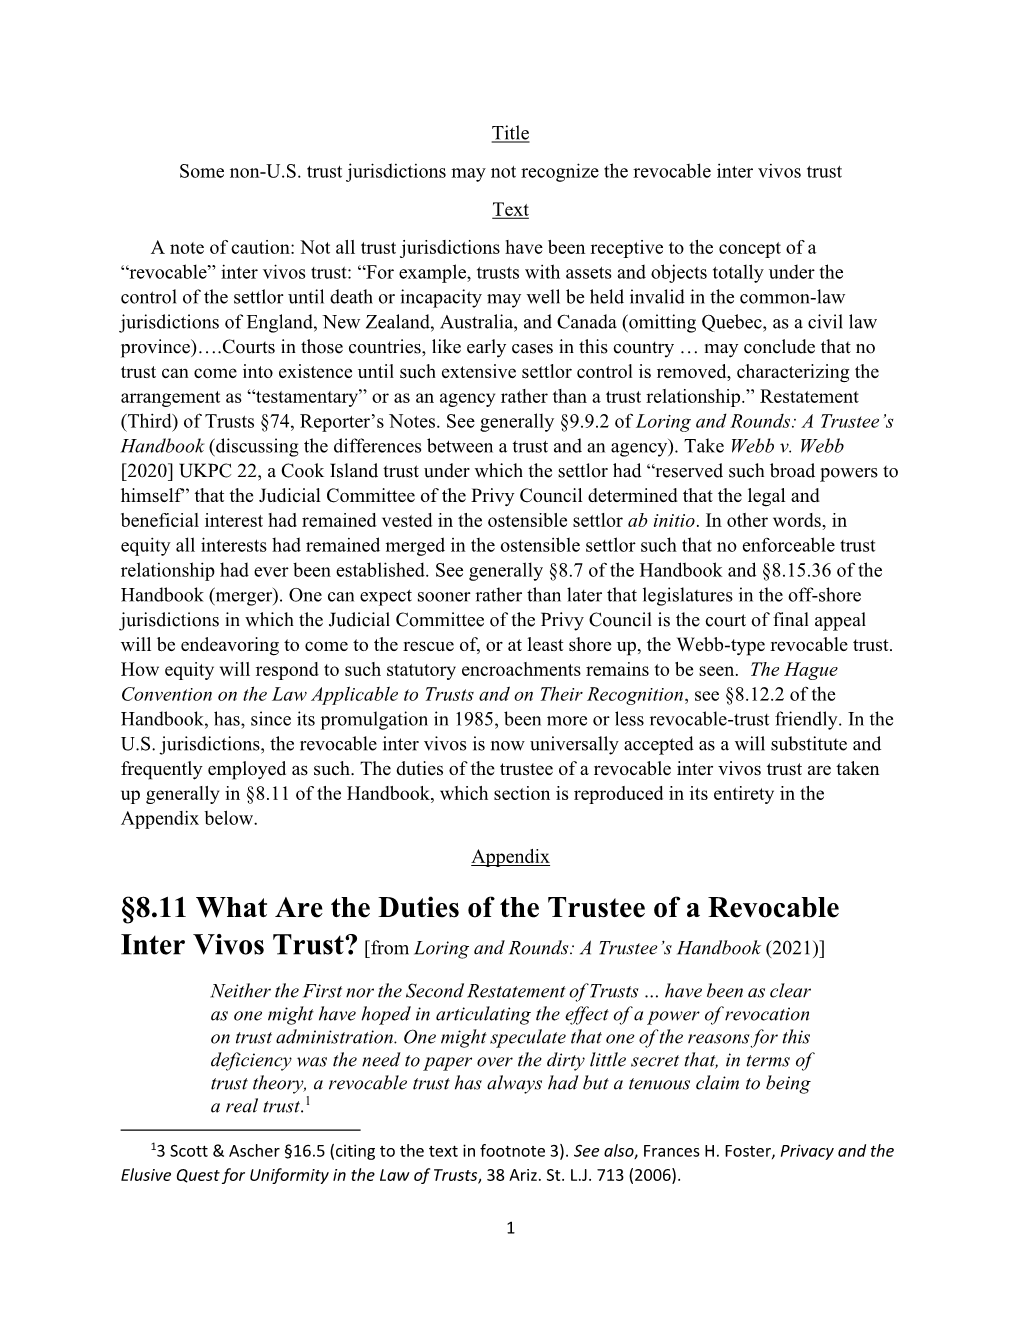 8.11 What Are the Duties of the Trustee of a Revocable Inter Vivos Trust? [From Loring and Rounds: a Trustee’S Handbook (2021)]